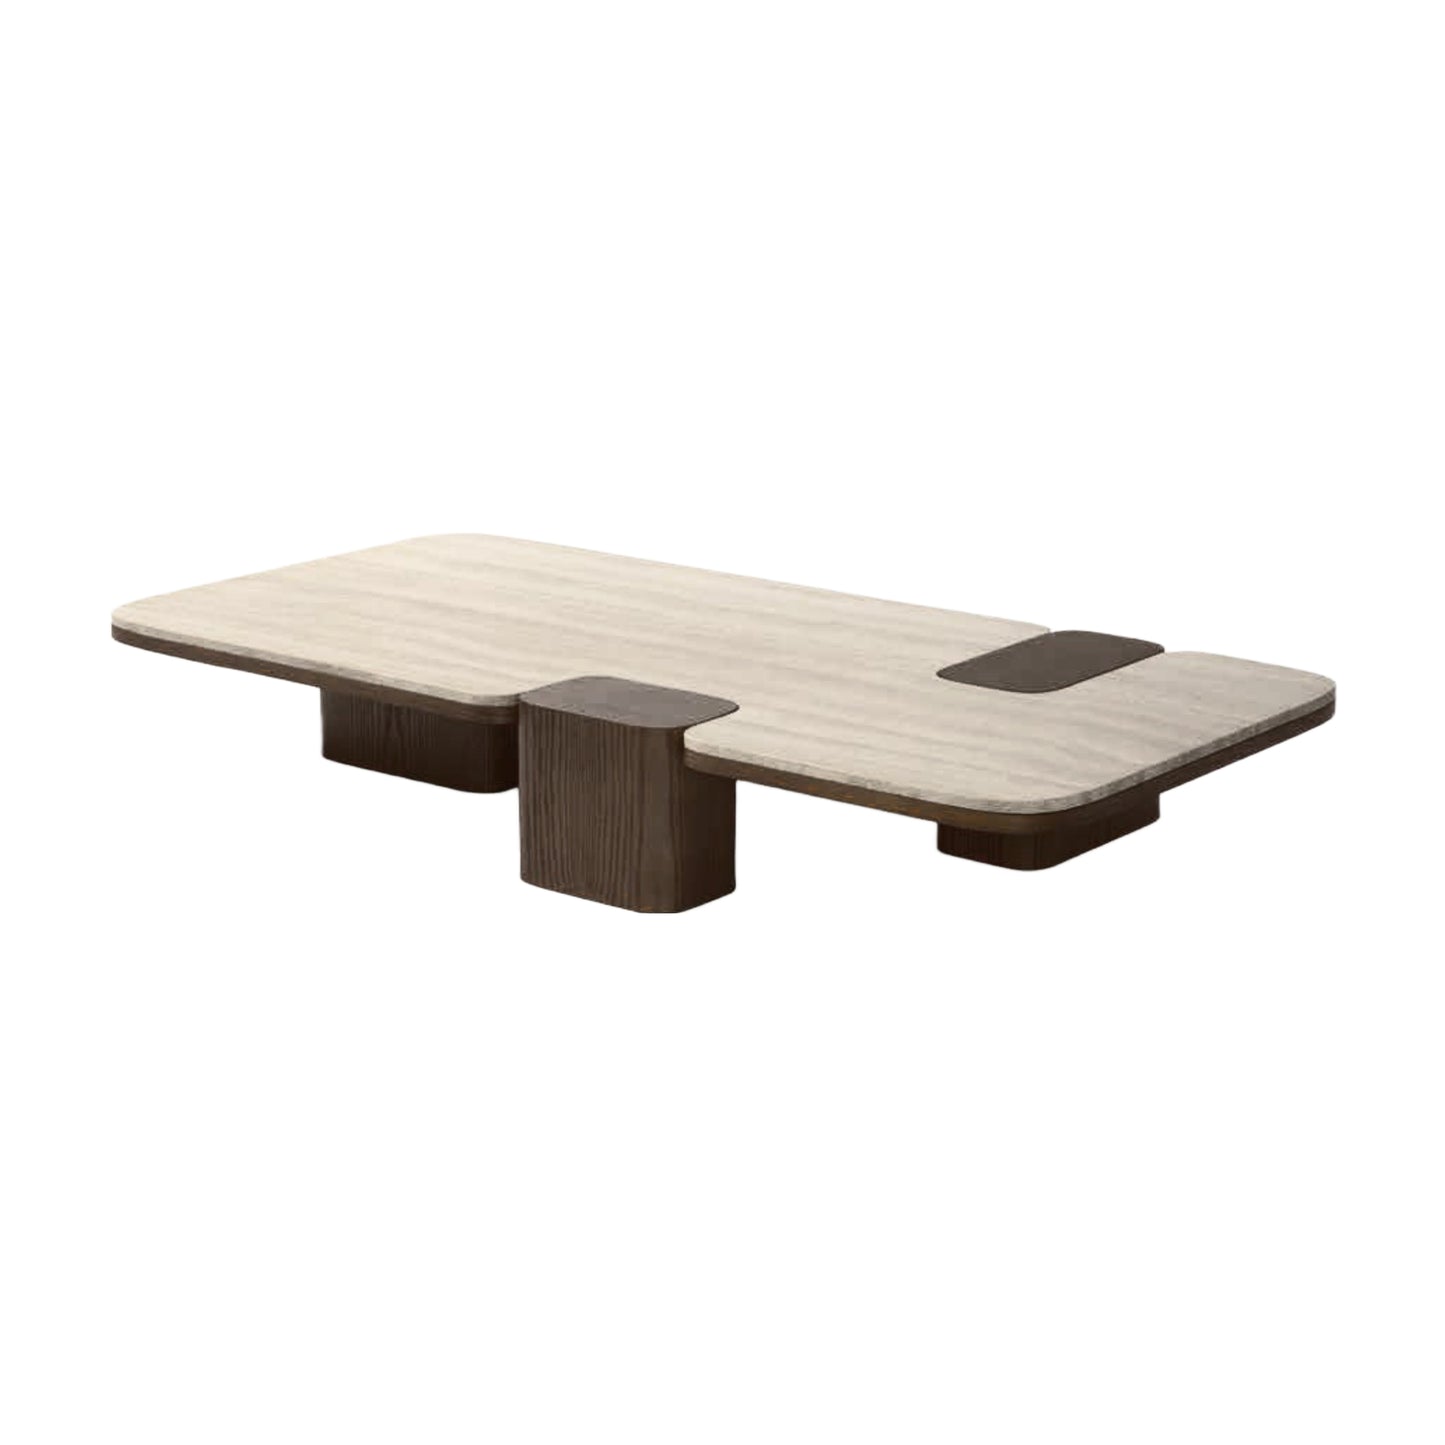 ERICE XL I Coffee Table by Carpanese - $14,000